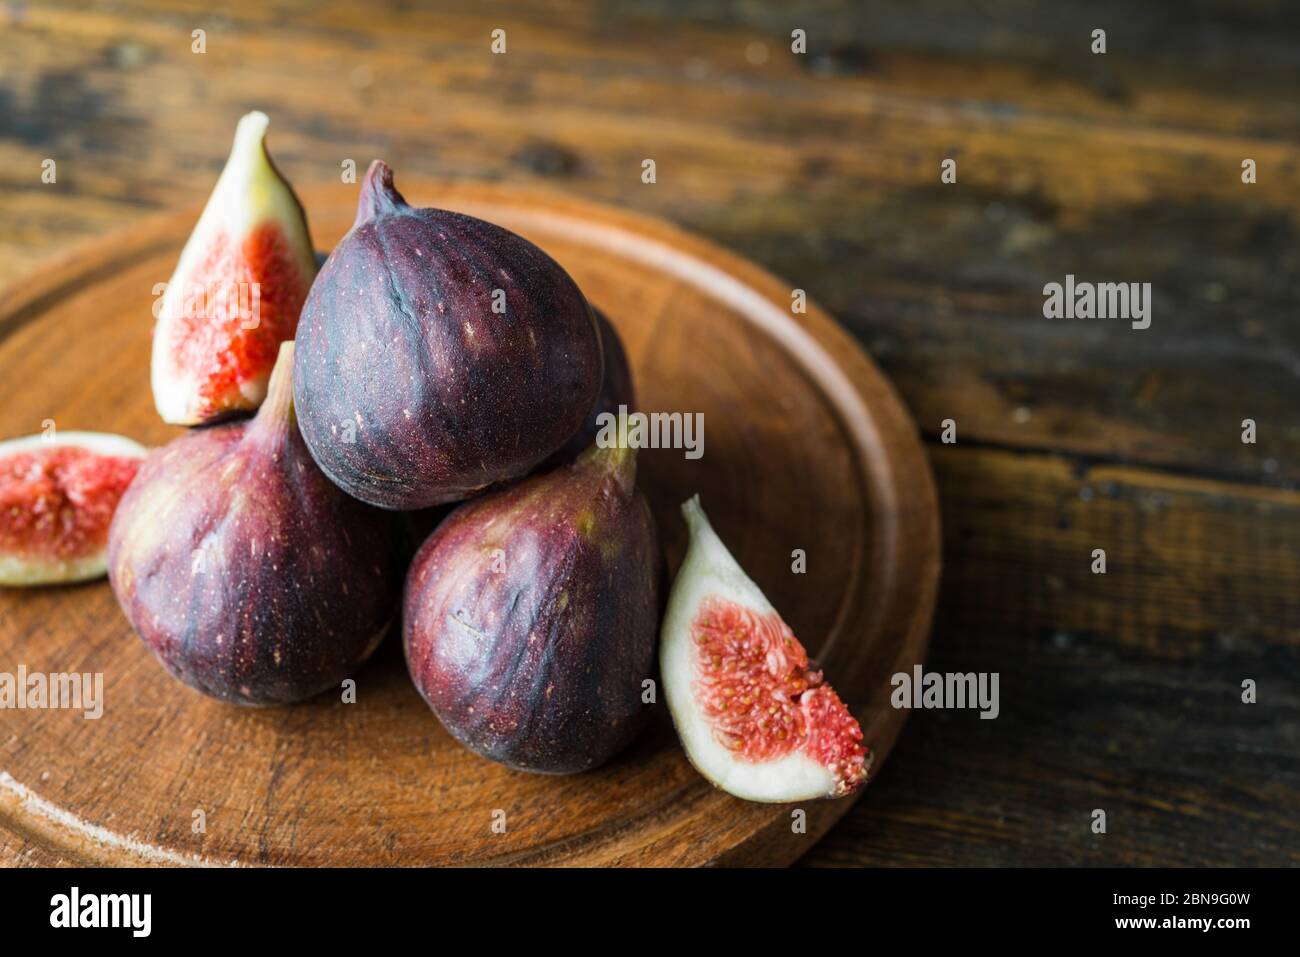 Close up of figs fruit against brown wooden background. Stock Photo